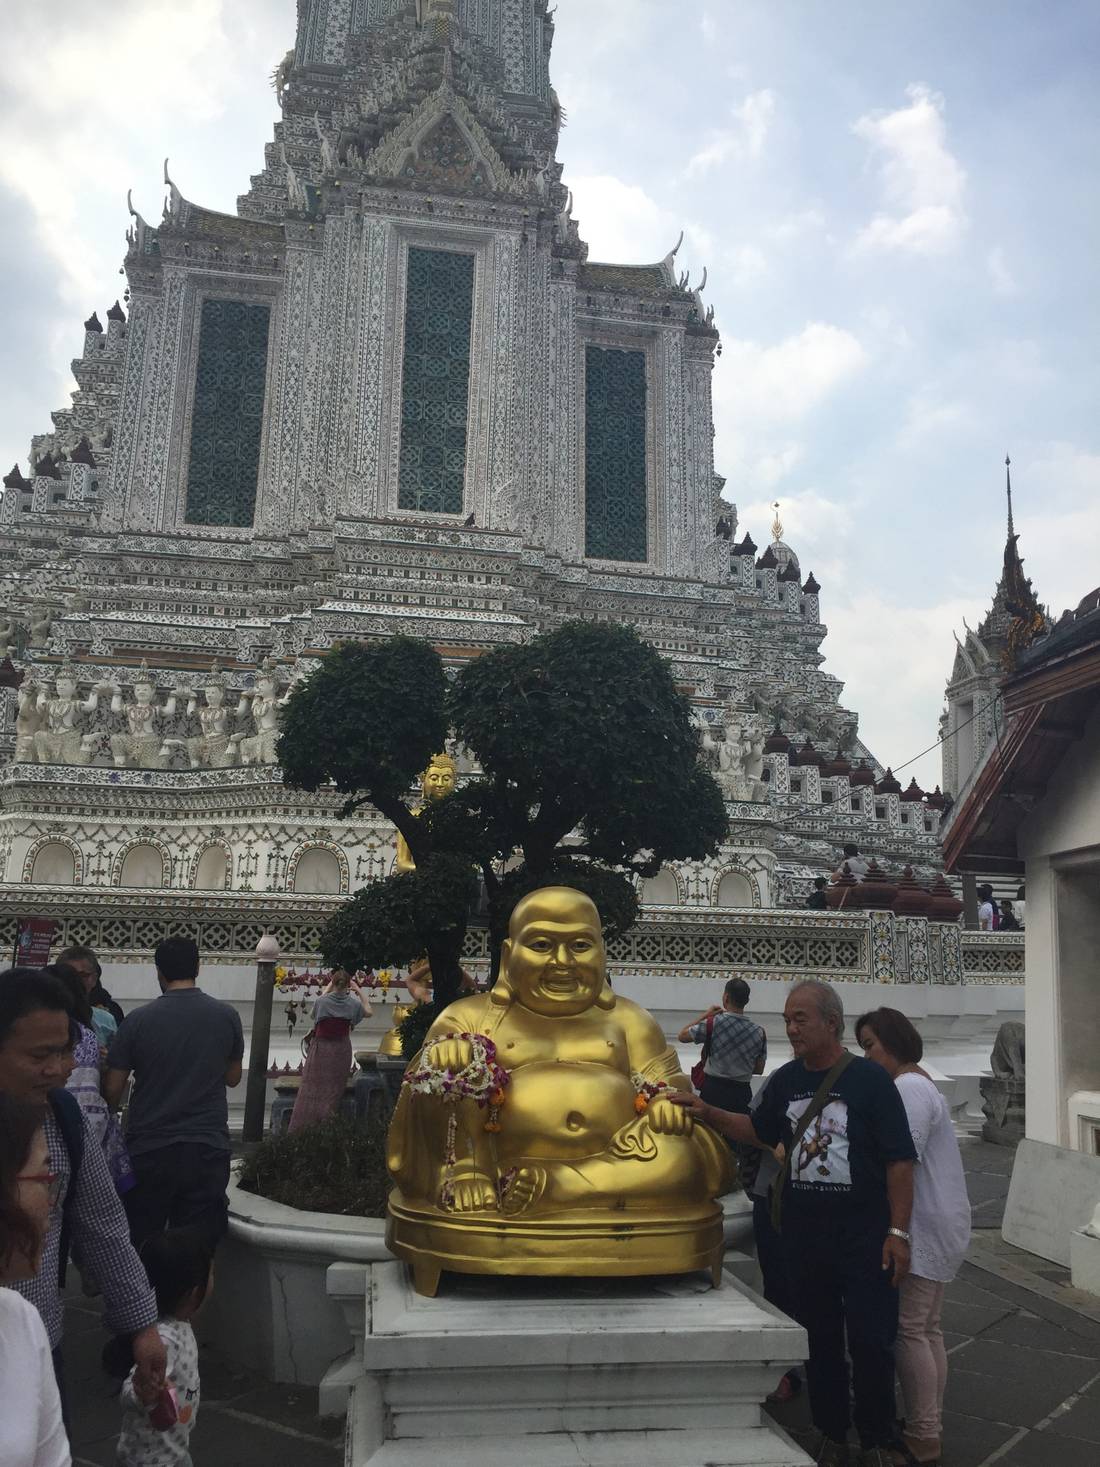 Right in front of the temple you will find a golden sitting Buddha.